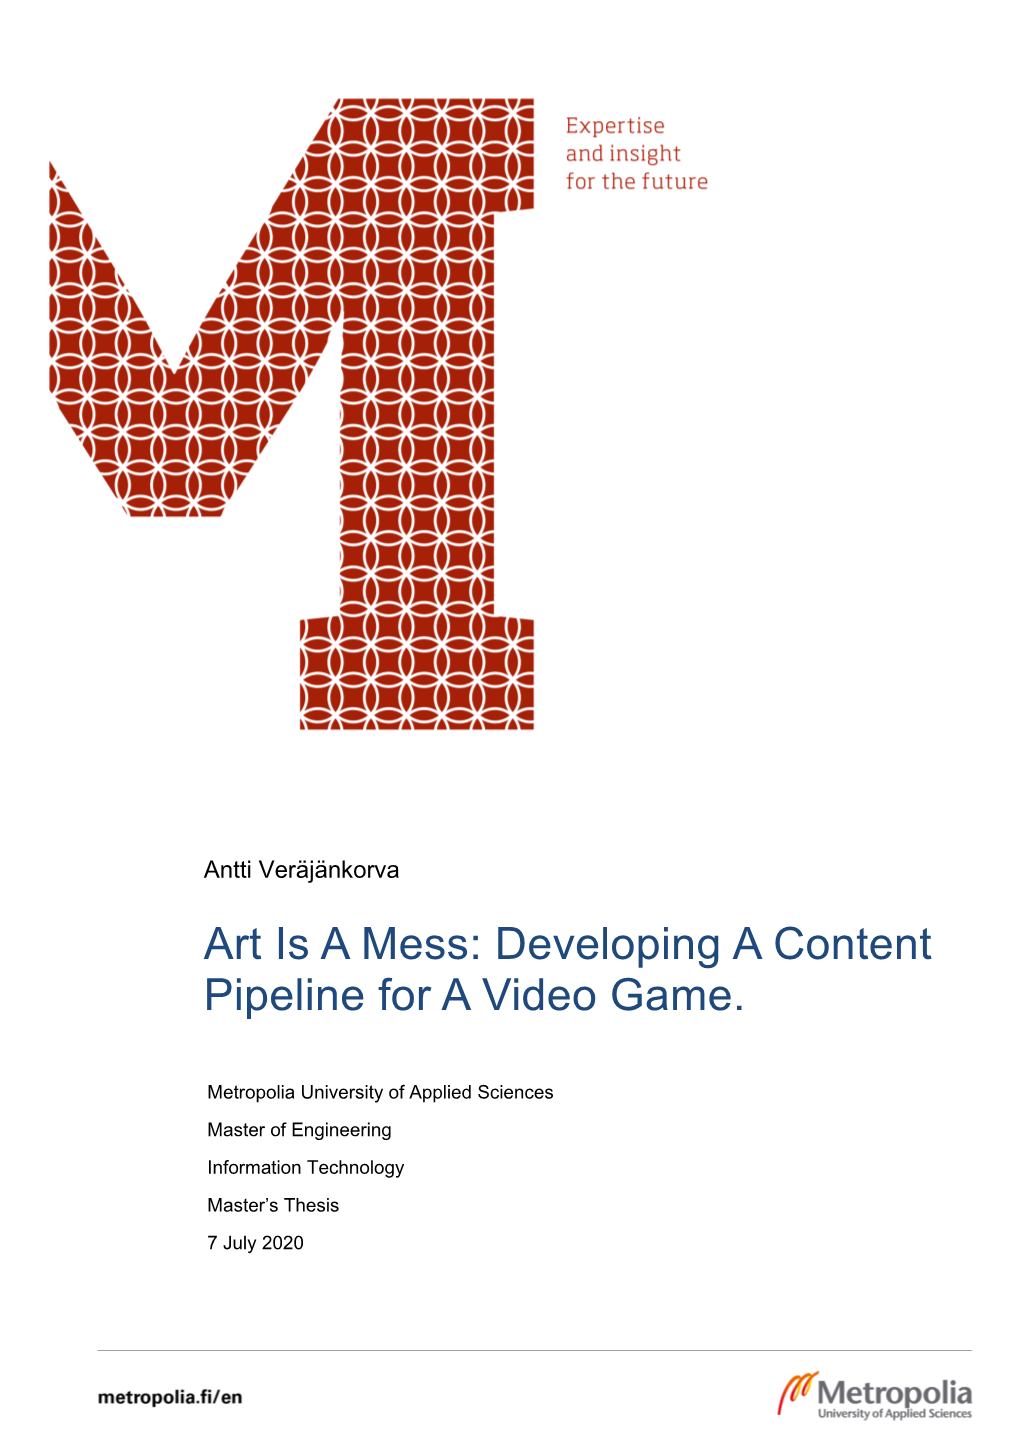 Developing a Content Pipeline for a Video Game